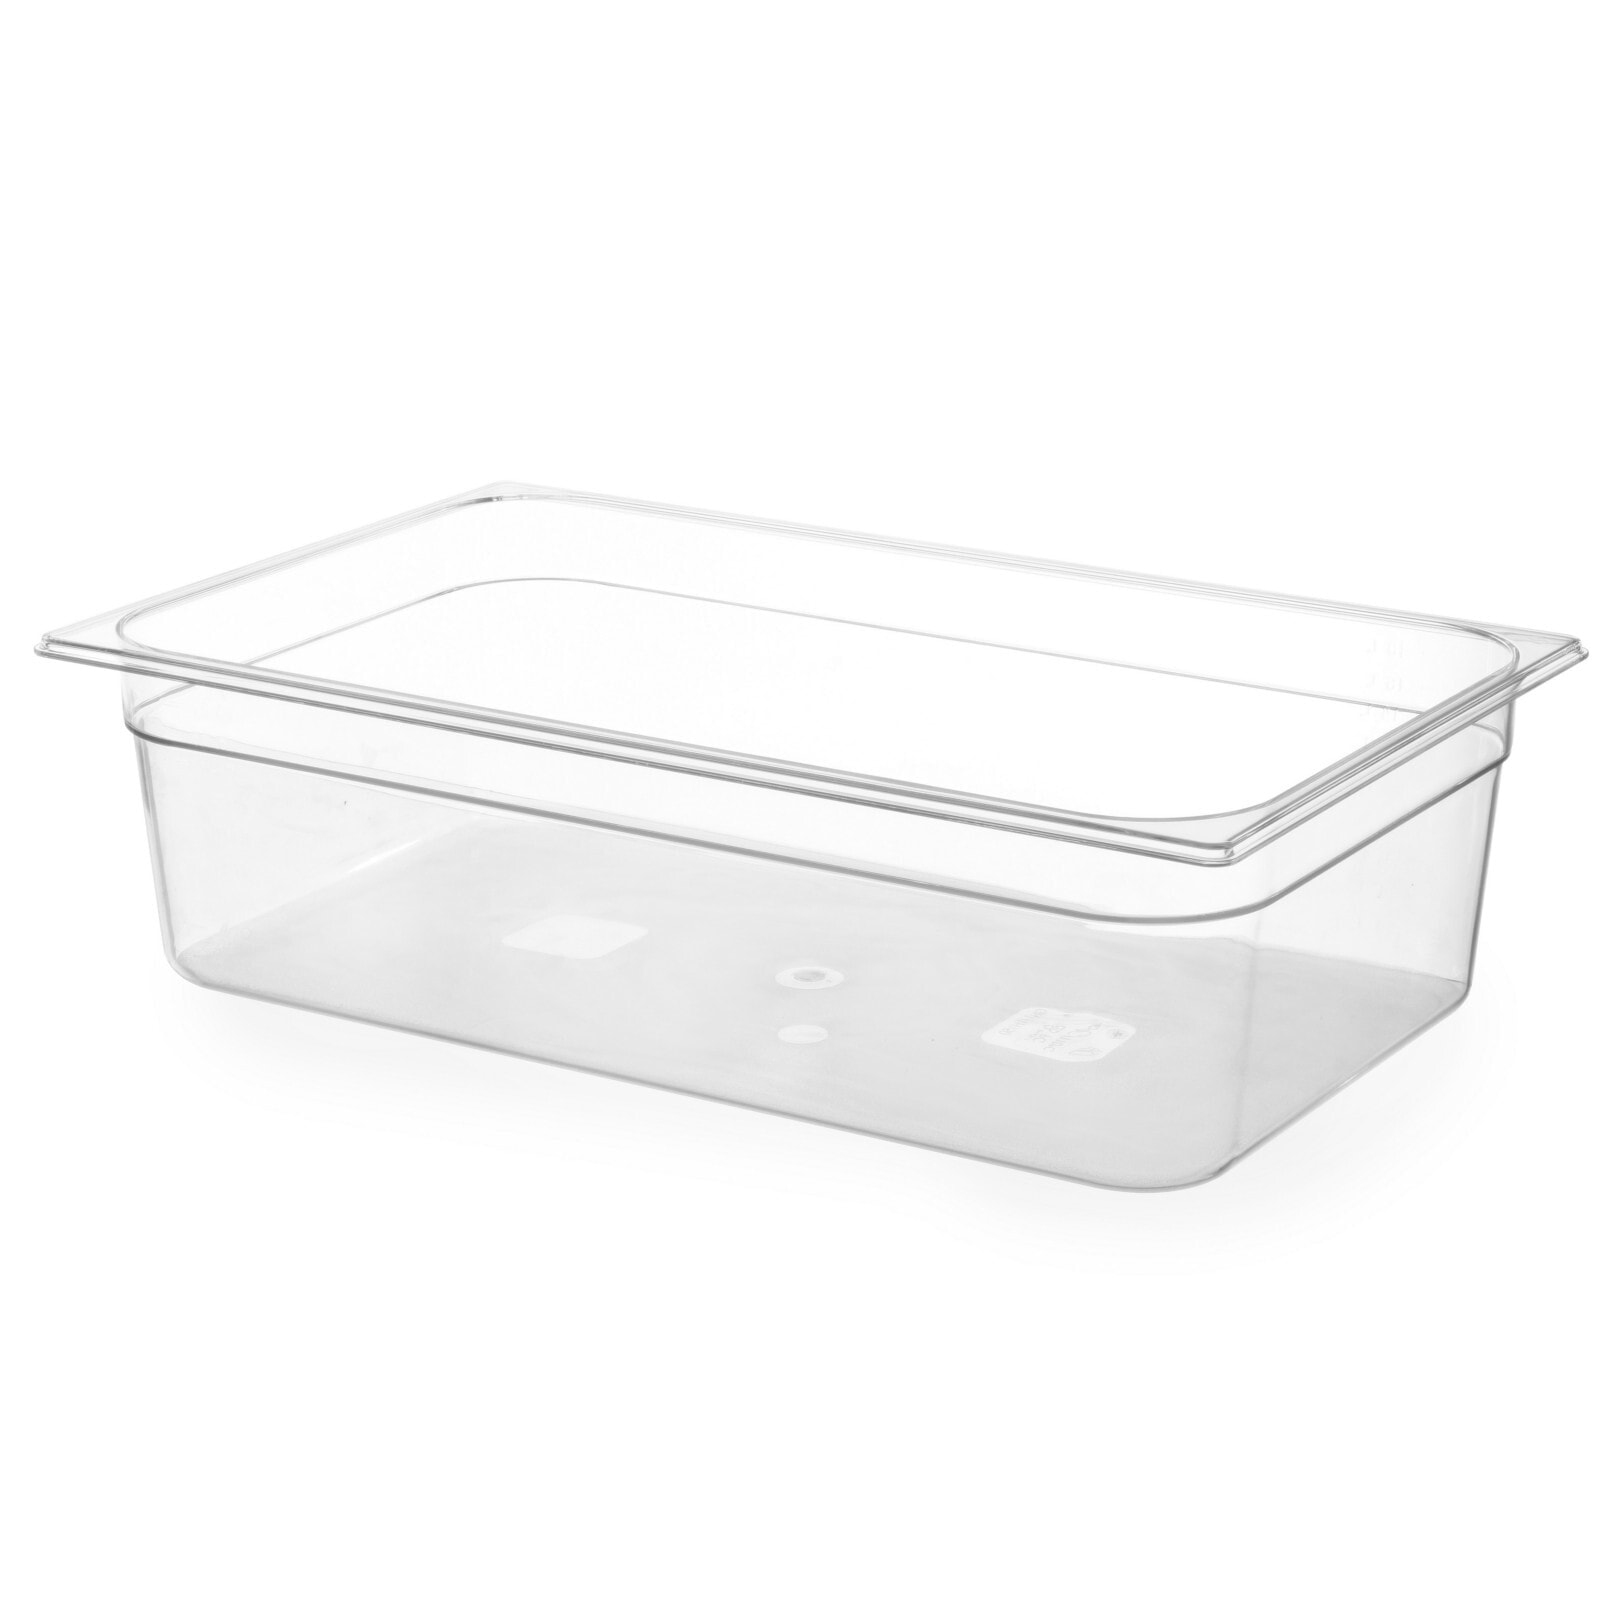 Transparent GN container made of polycarbonate GN 1/1, height 100 mm - Hendi 861226